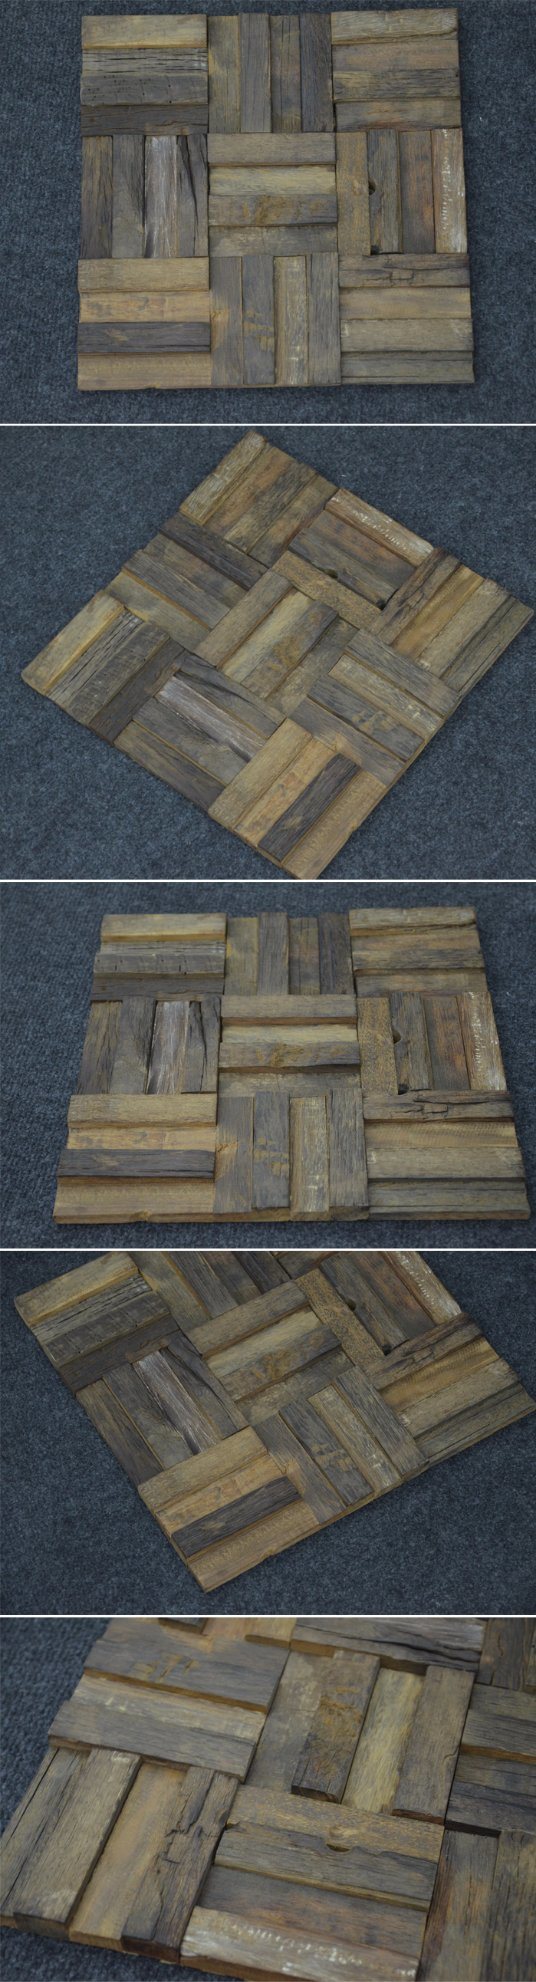 Foshan High-End Wholesale Price Old Boat Wood Mosaic